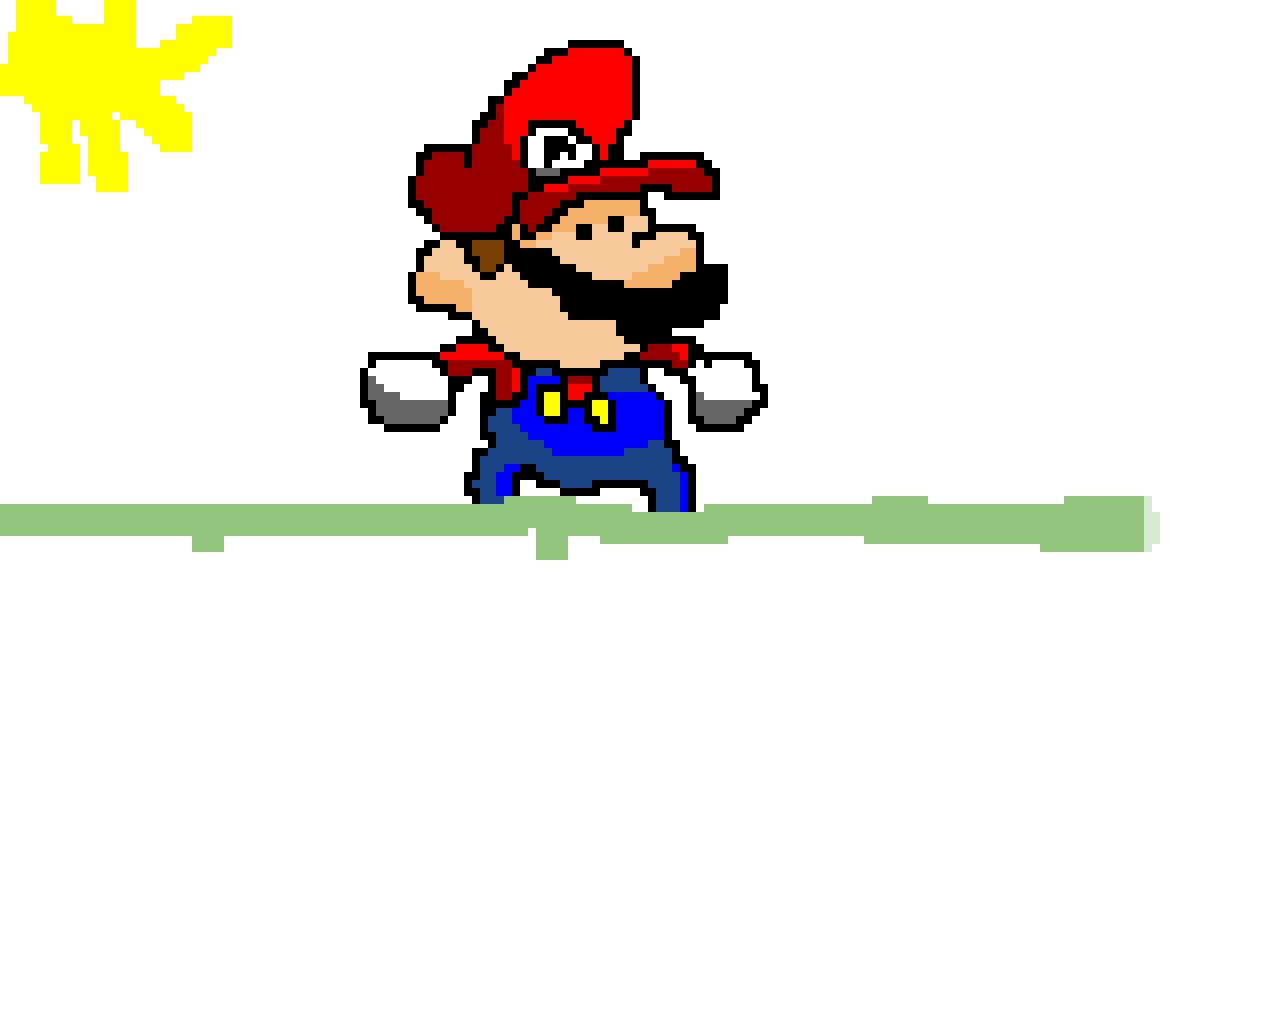 speed runner mario edited also props to the creator for reals its a good drawing